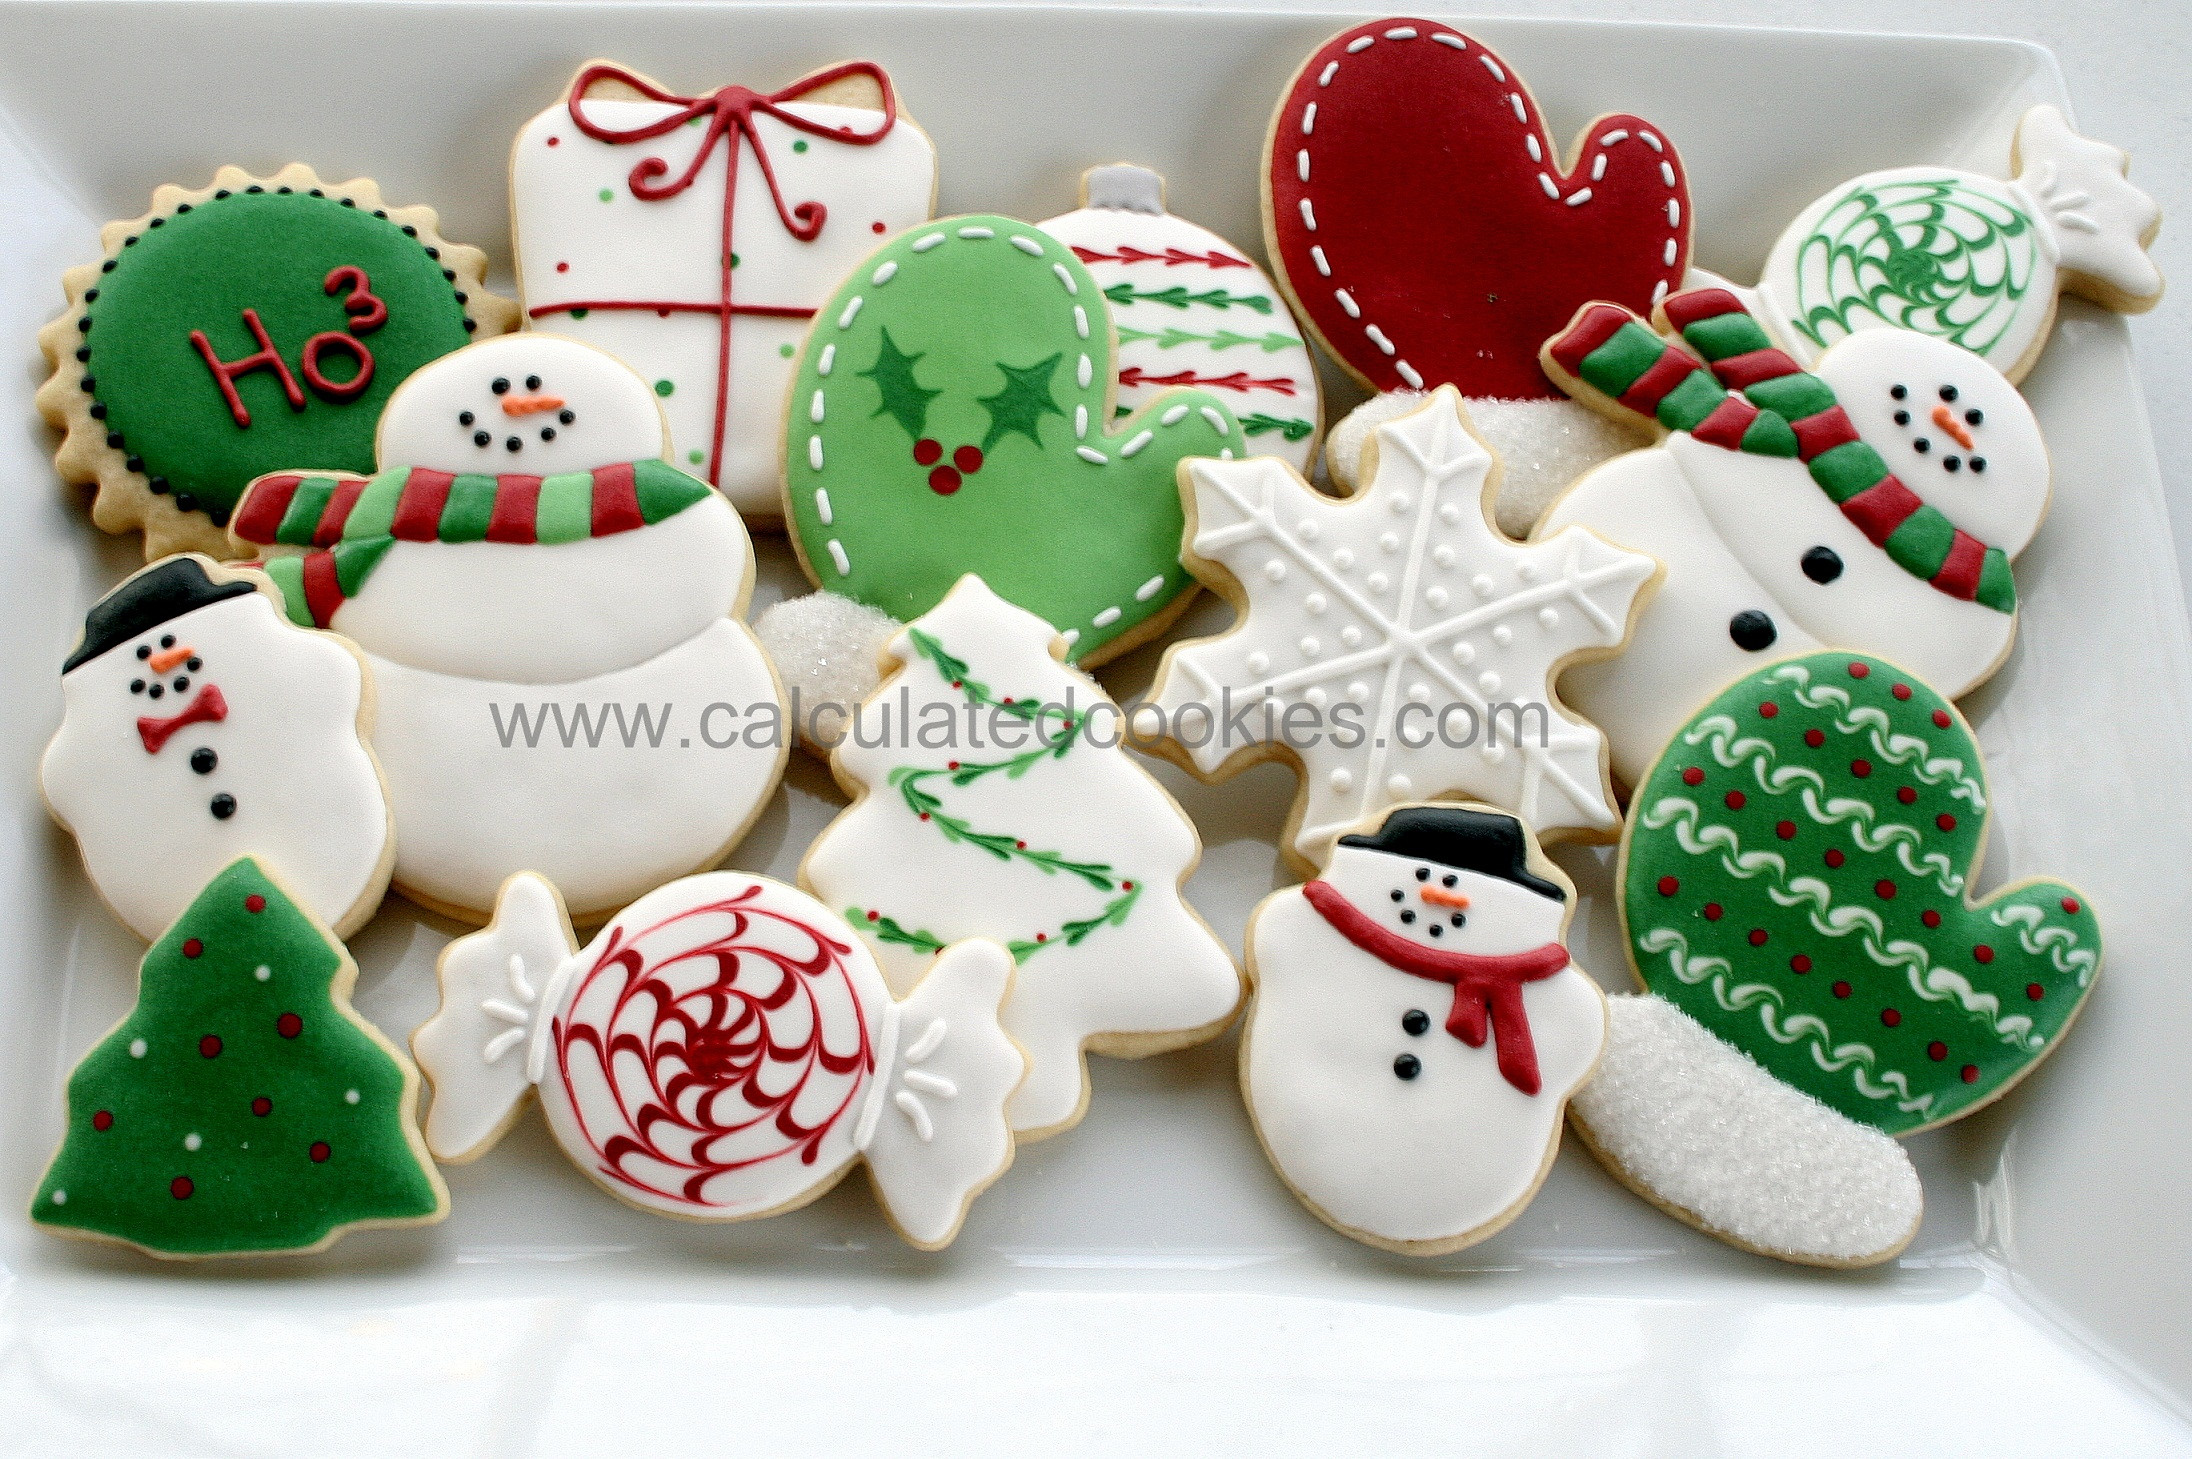 Decorated Christmas Sugar Cookies
 2012 Archives Calculated CookiesCalculated Cookies